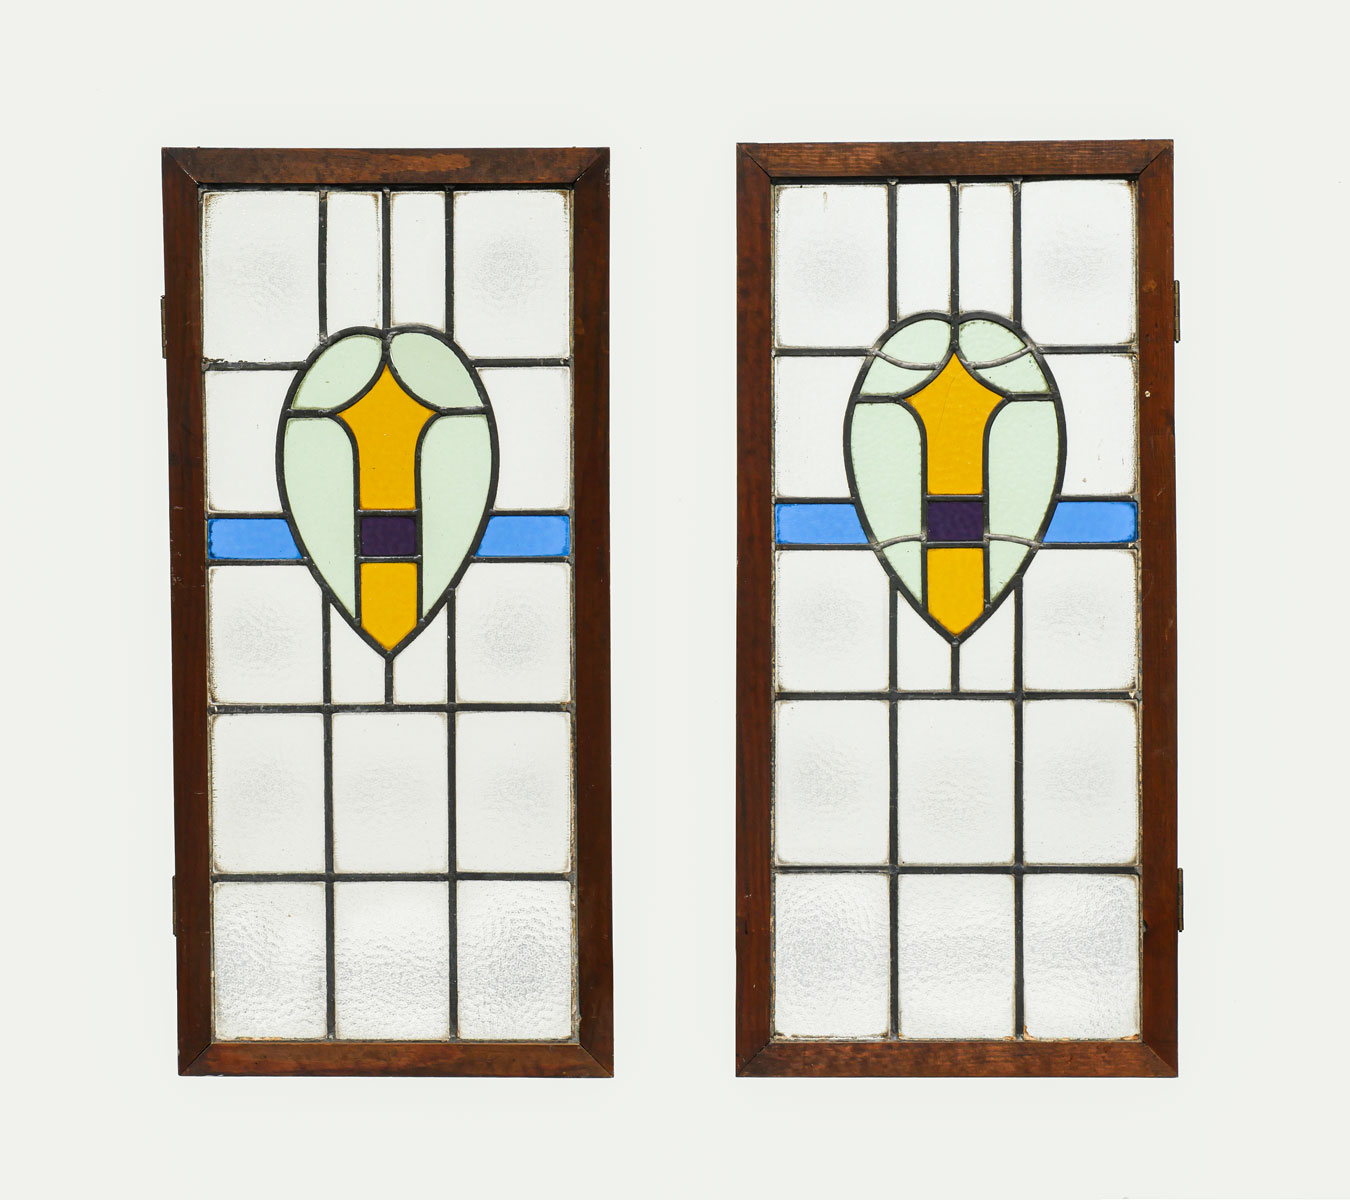 2 ARCHITECTURAL STAINED GLASS PANELS: